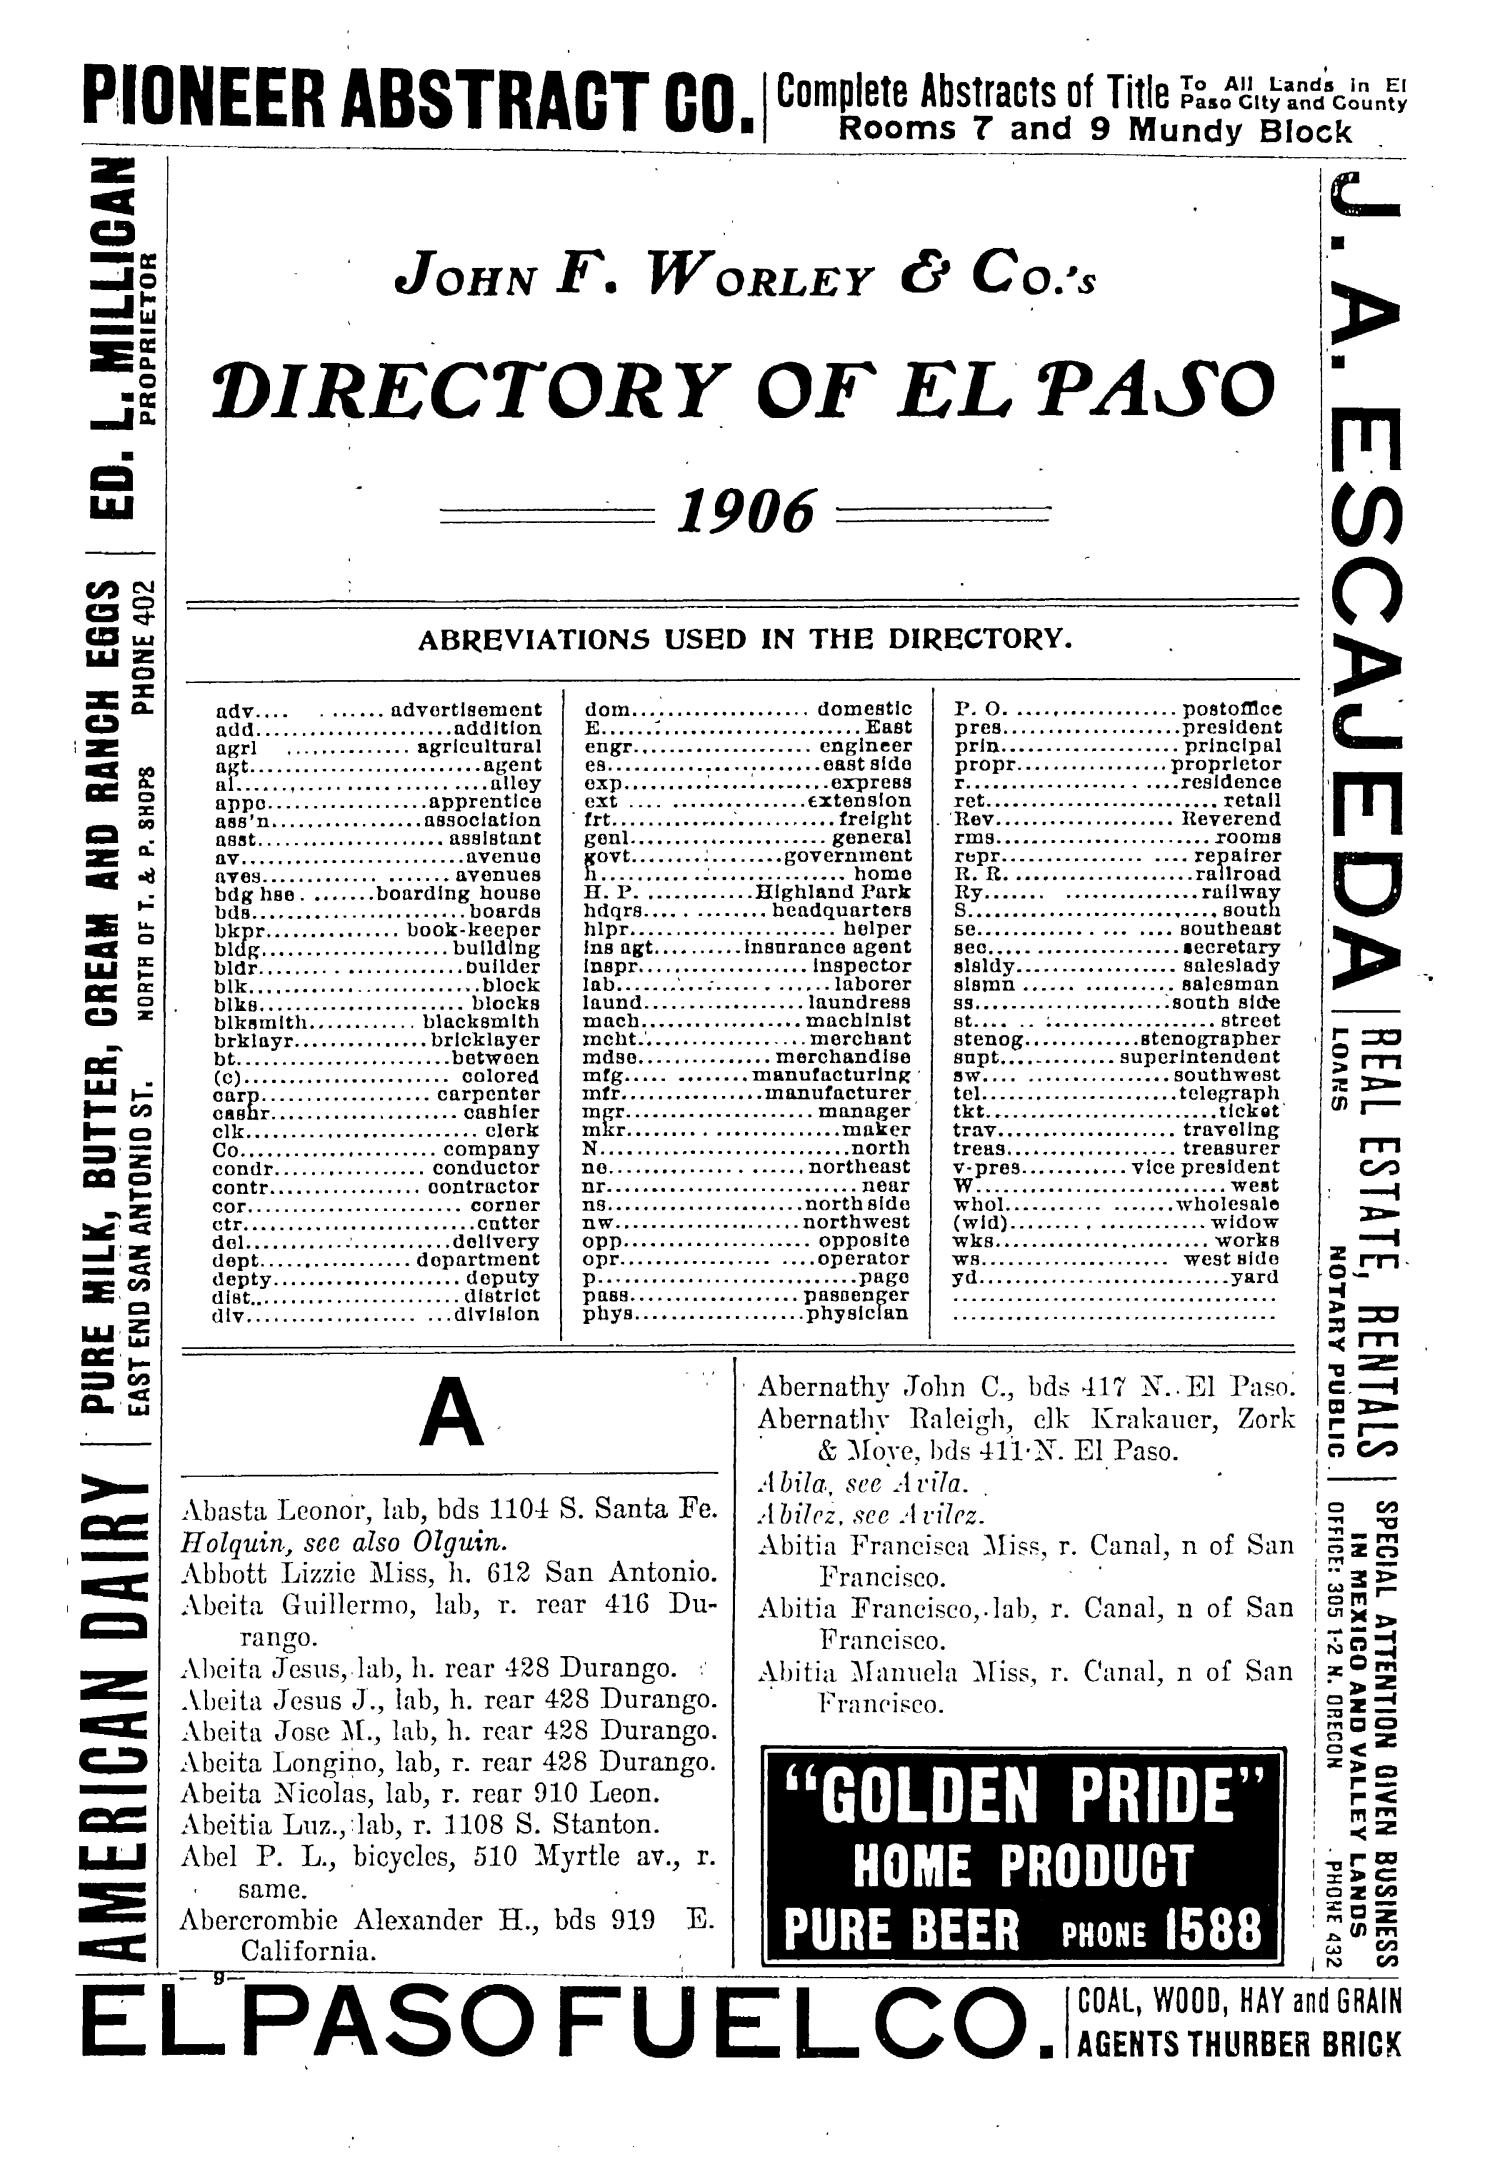 John F. Worley & Co.'s El Paso Directory for 1906
                                                
                                                    107
                                                